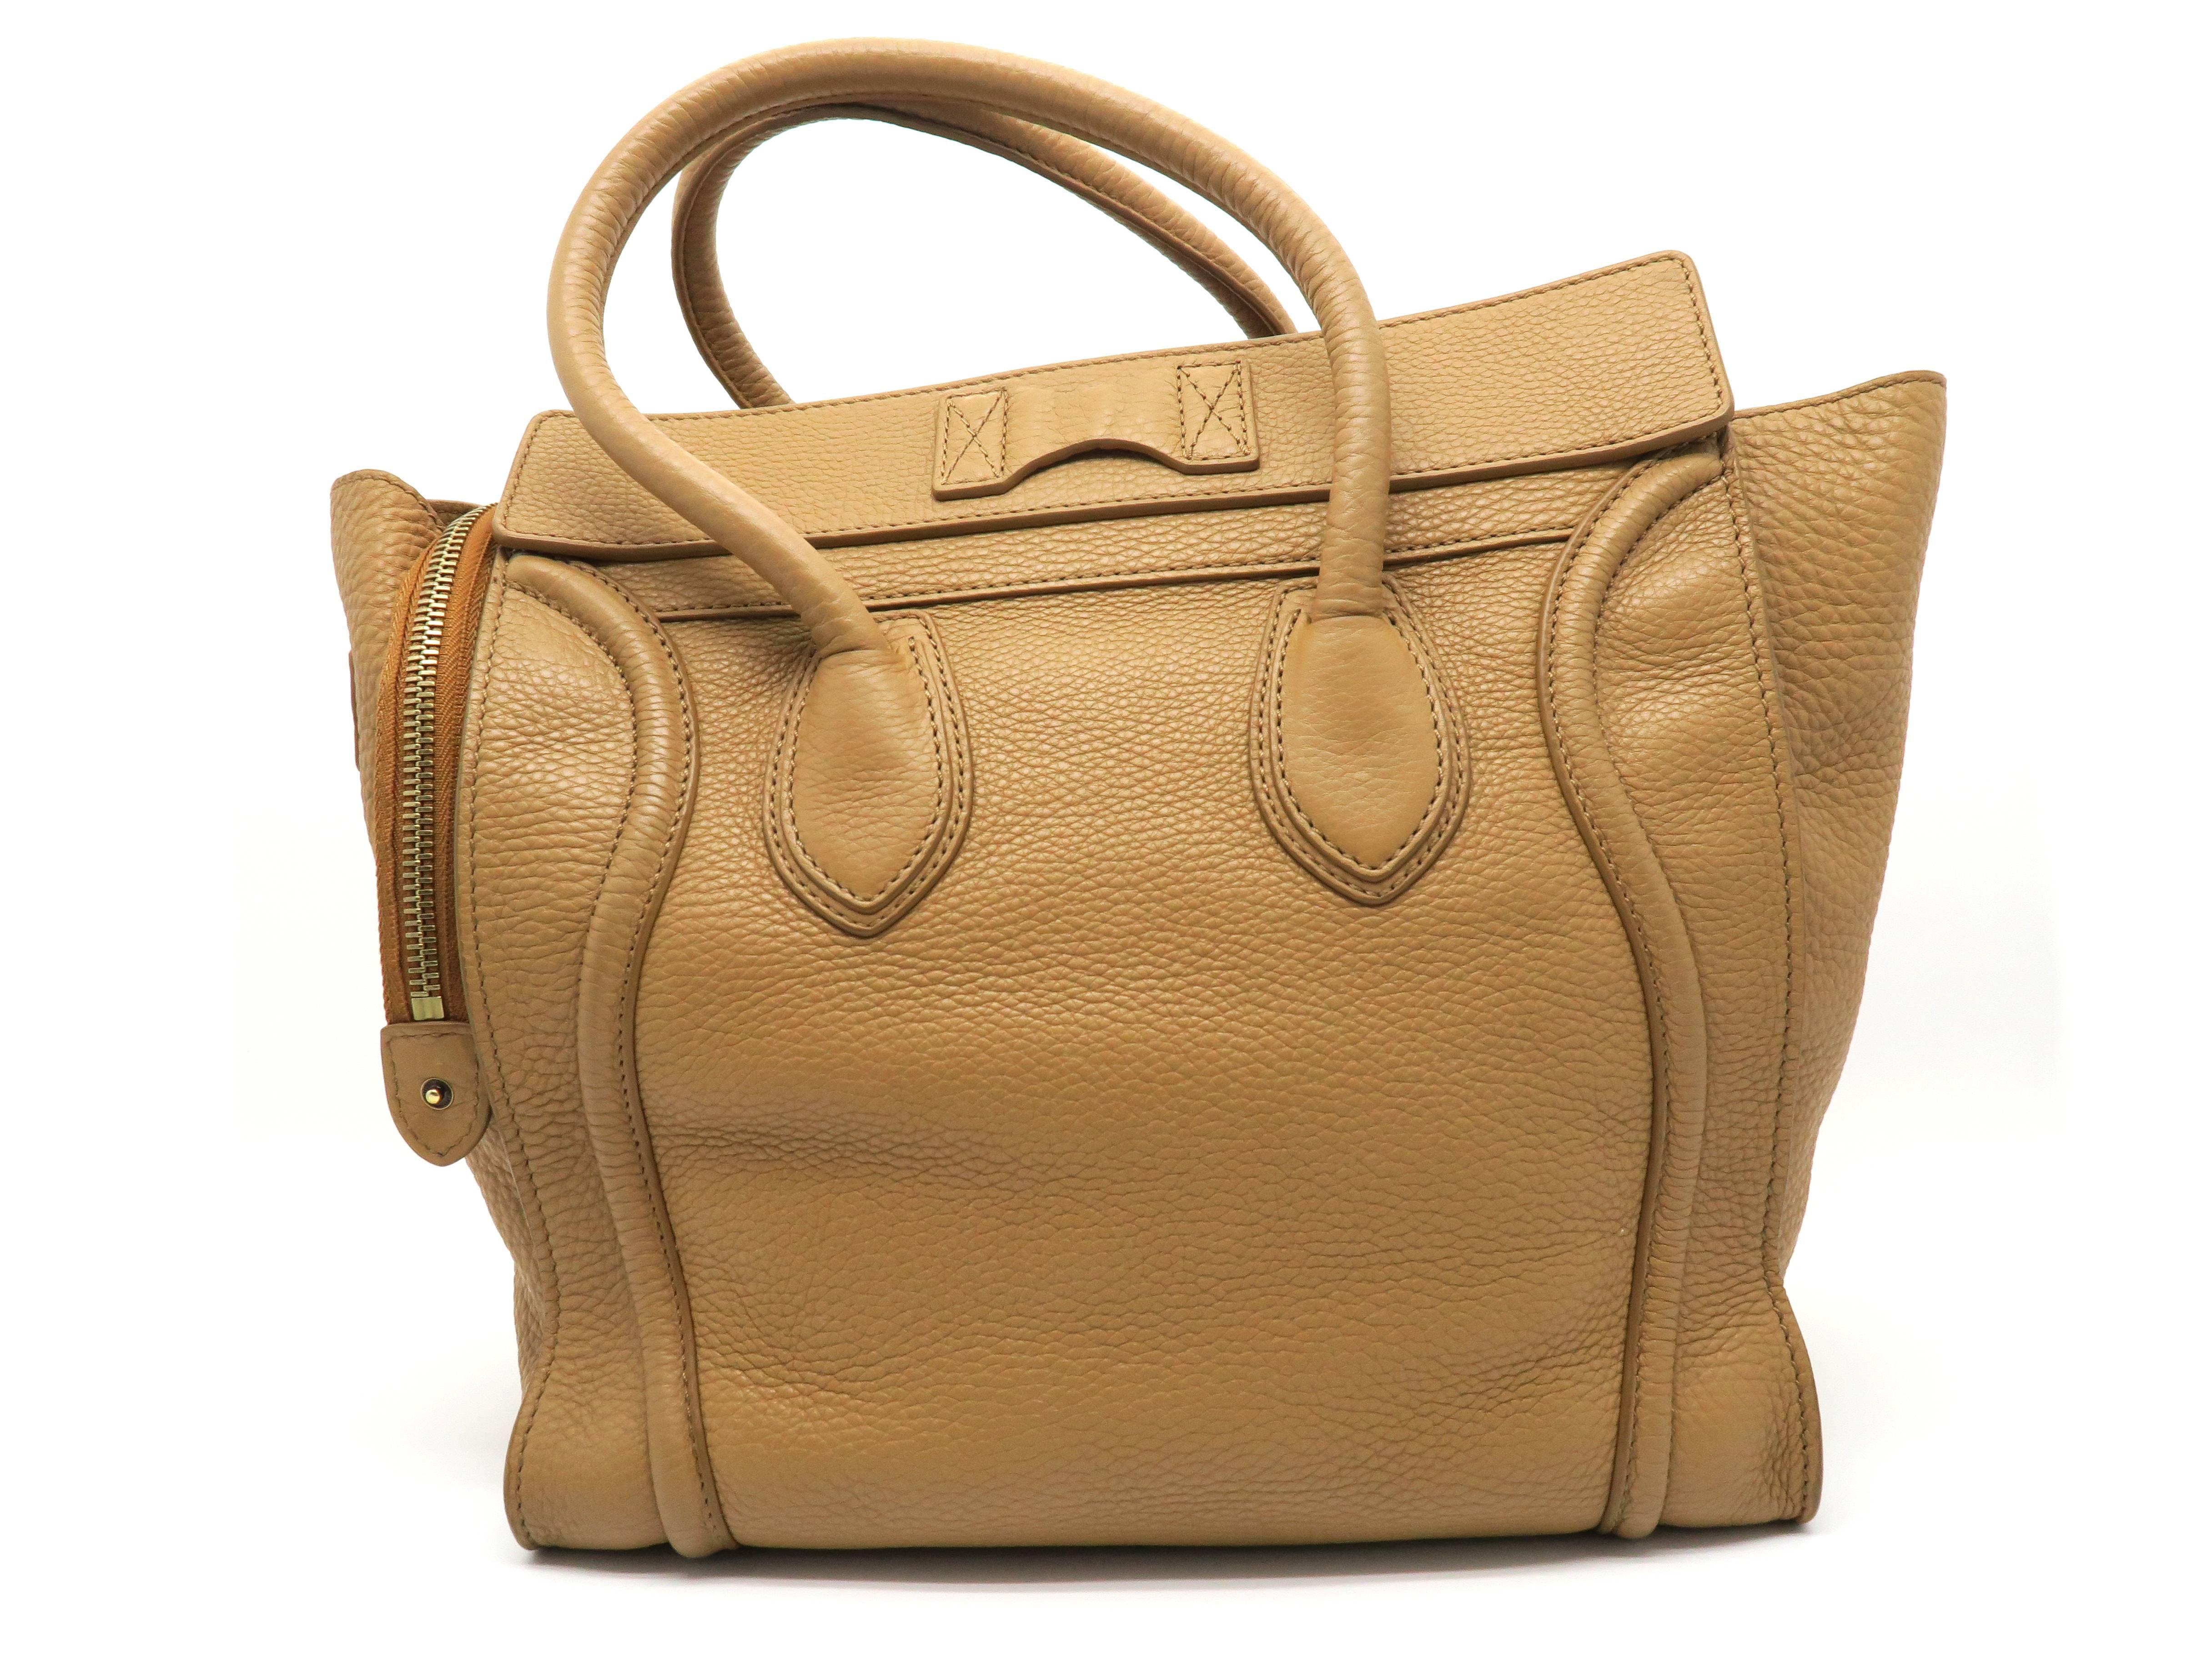 Celine Luggage Brown Calfskin Leather Handbag In Excellent Condition For Sale In Kowloon, HK